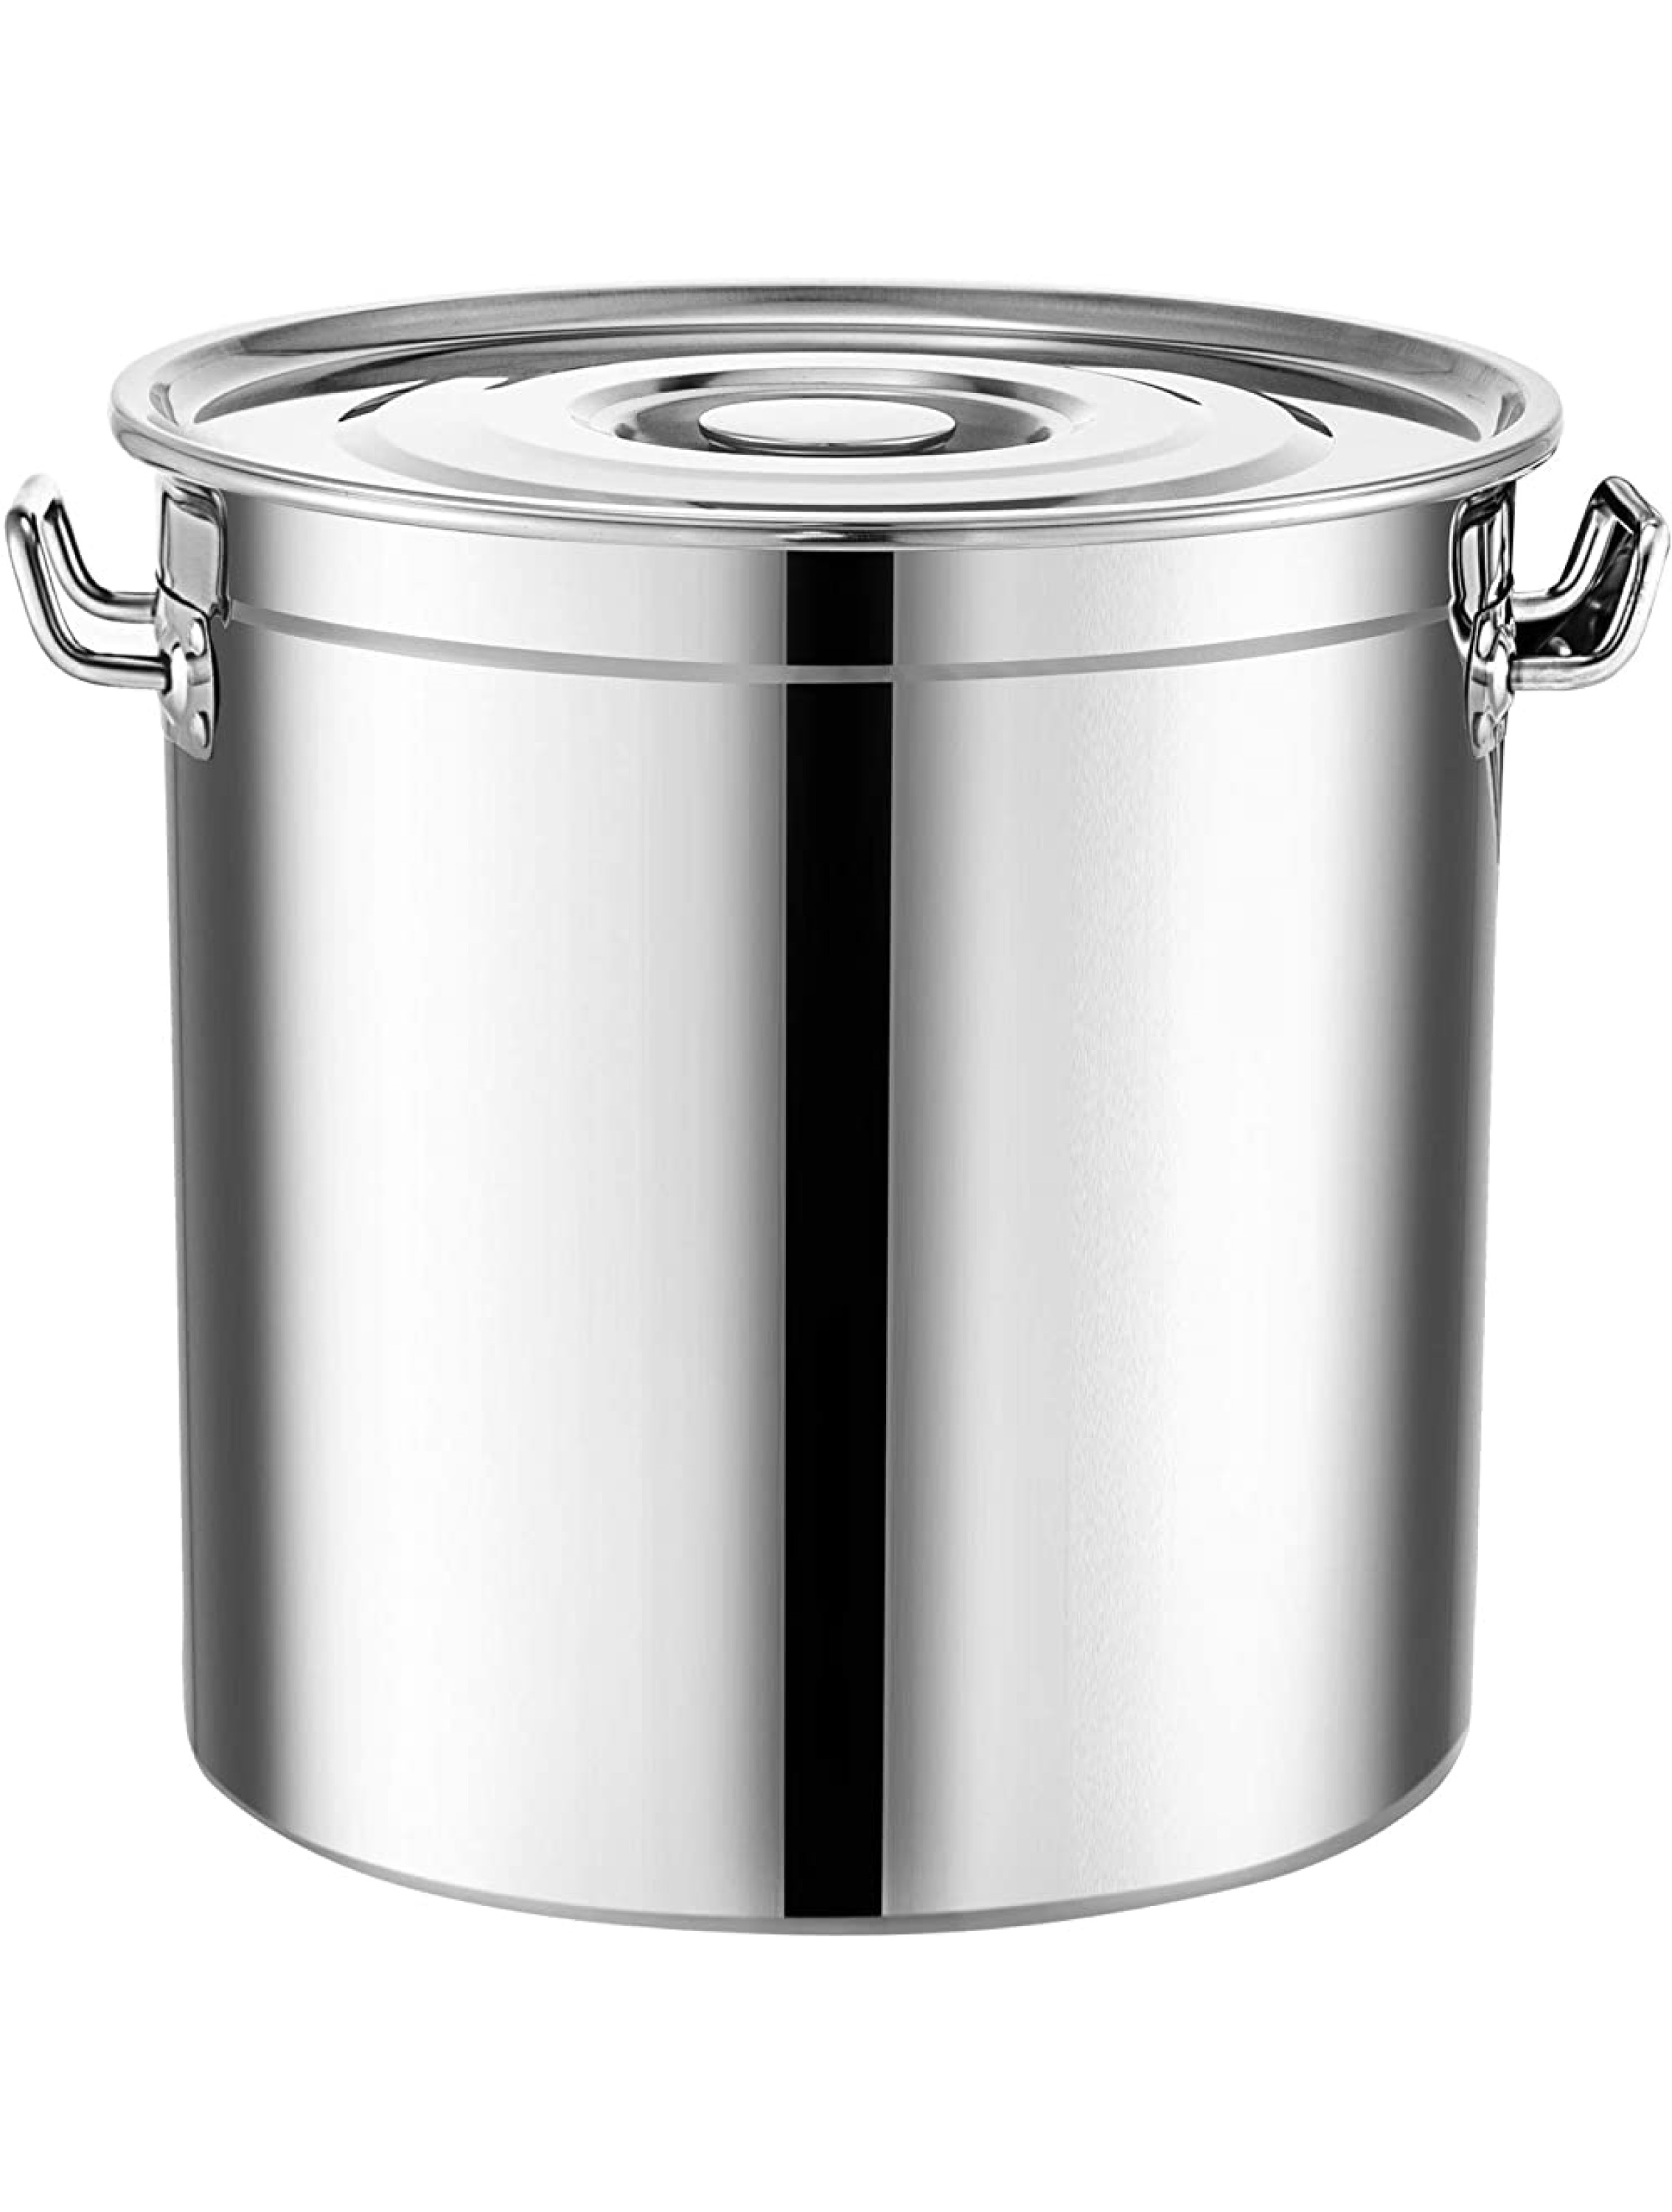 Mophorn Brew kettle Stockpot with Lid Stainless Steel Bot Brewing Home Brewing for Beer Brewing Maple Syrup Stainless Steel Stock Pot Cookware 35 Quart - BK1VQYFZS